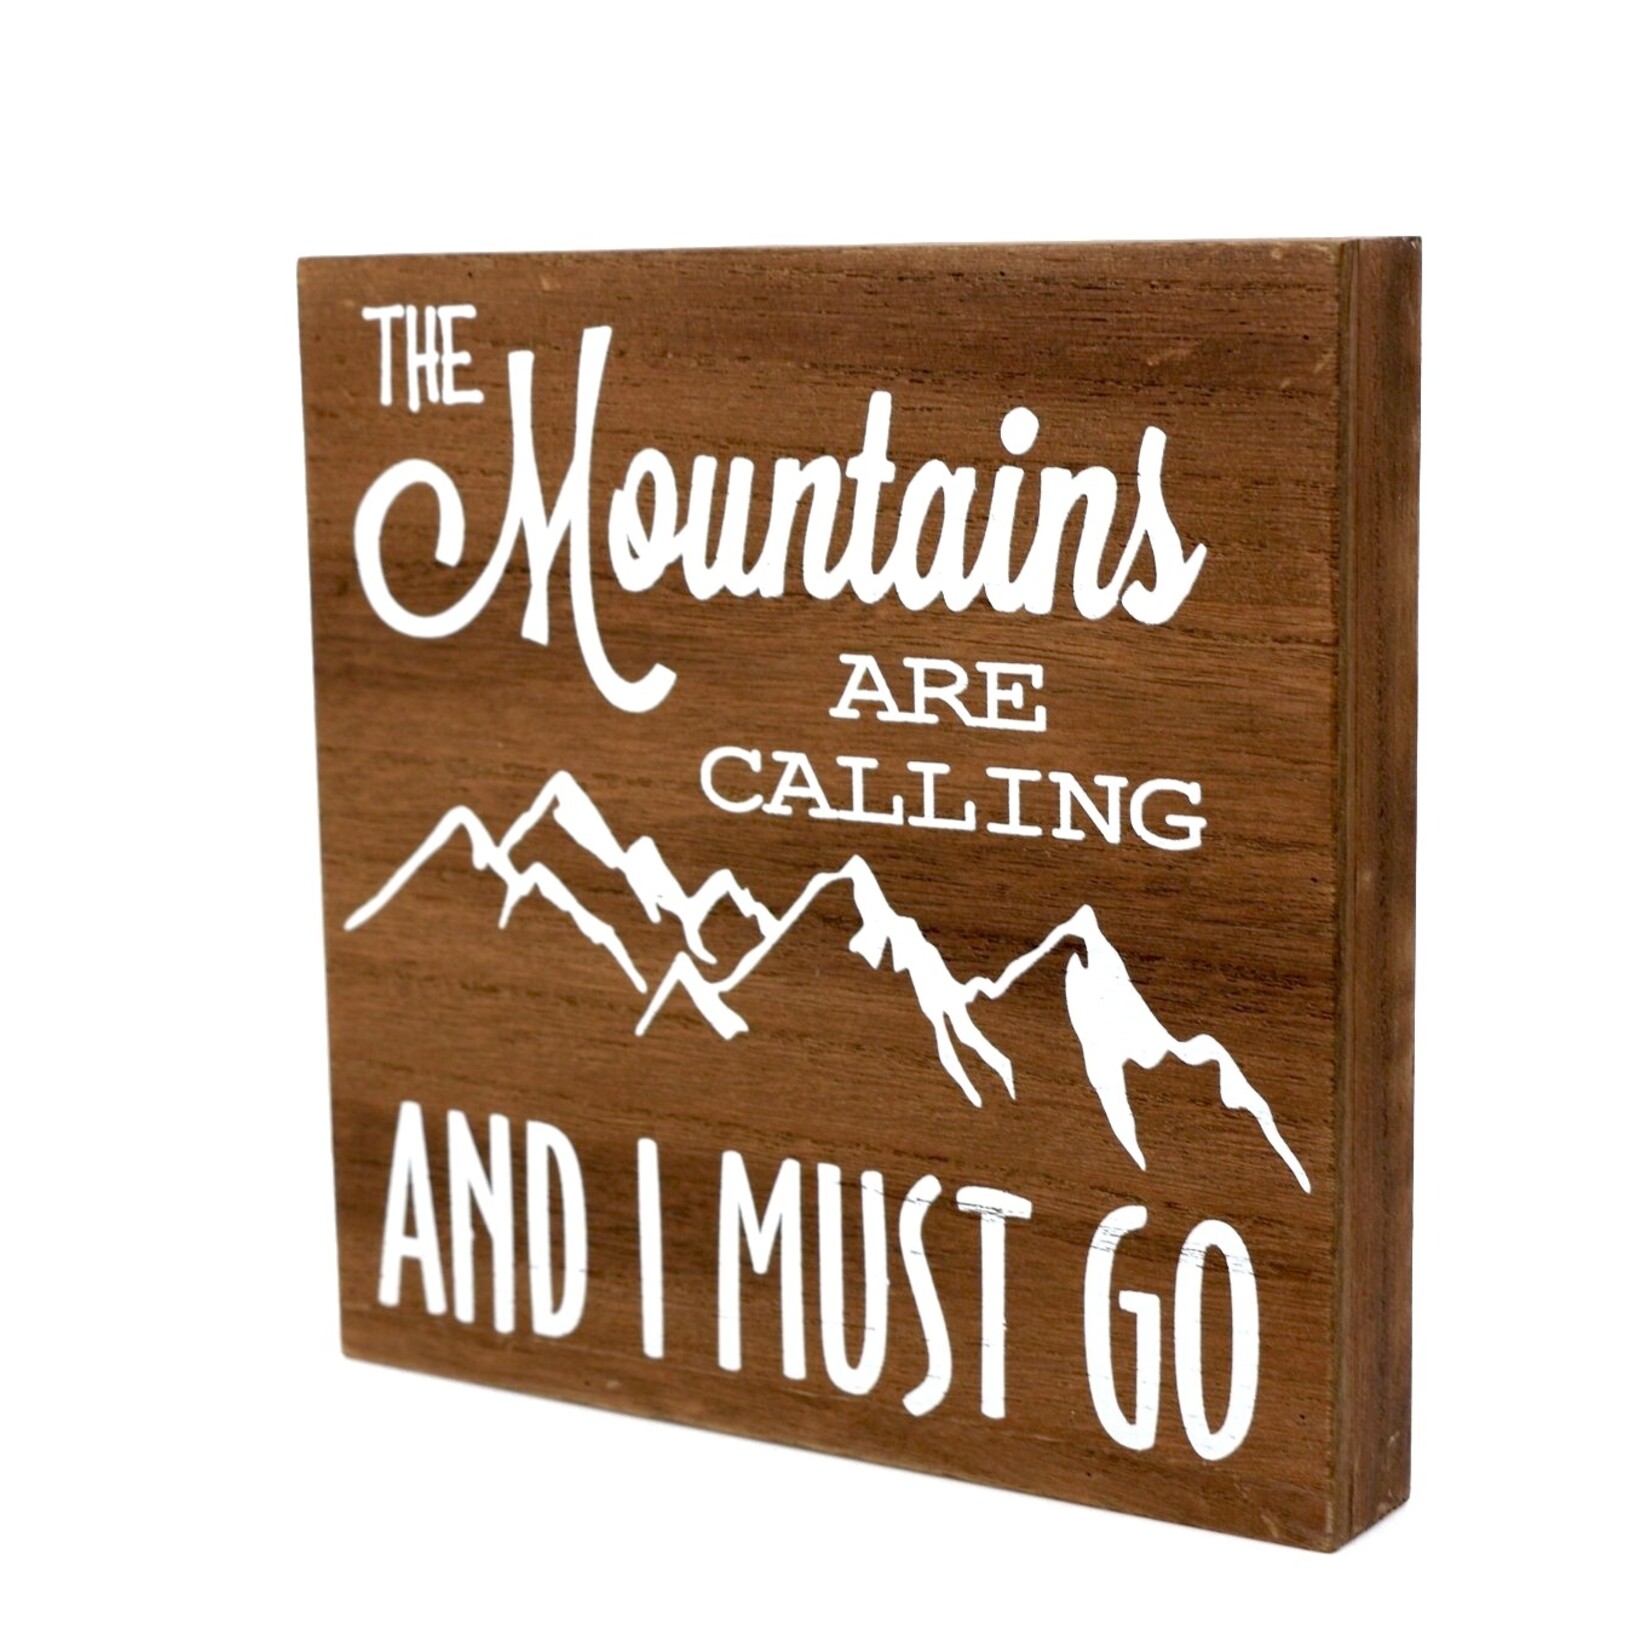 BARRY OWEN INC The Mountains Are Calling And I Must Go Wood Sign